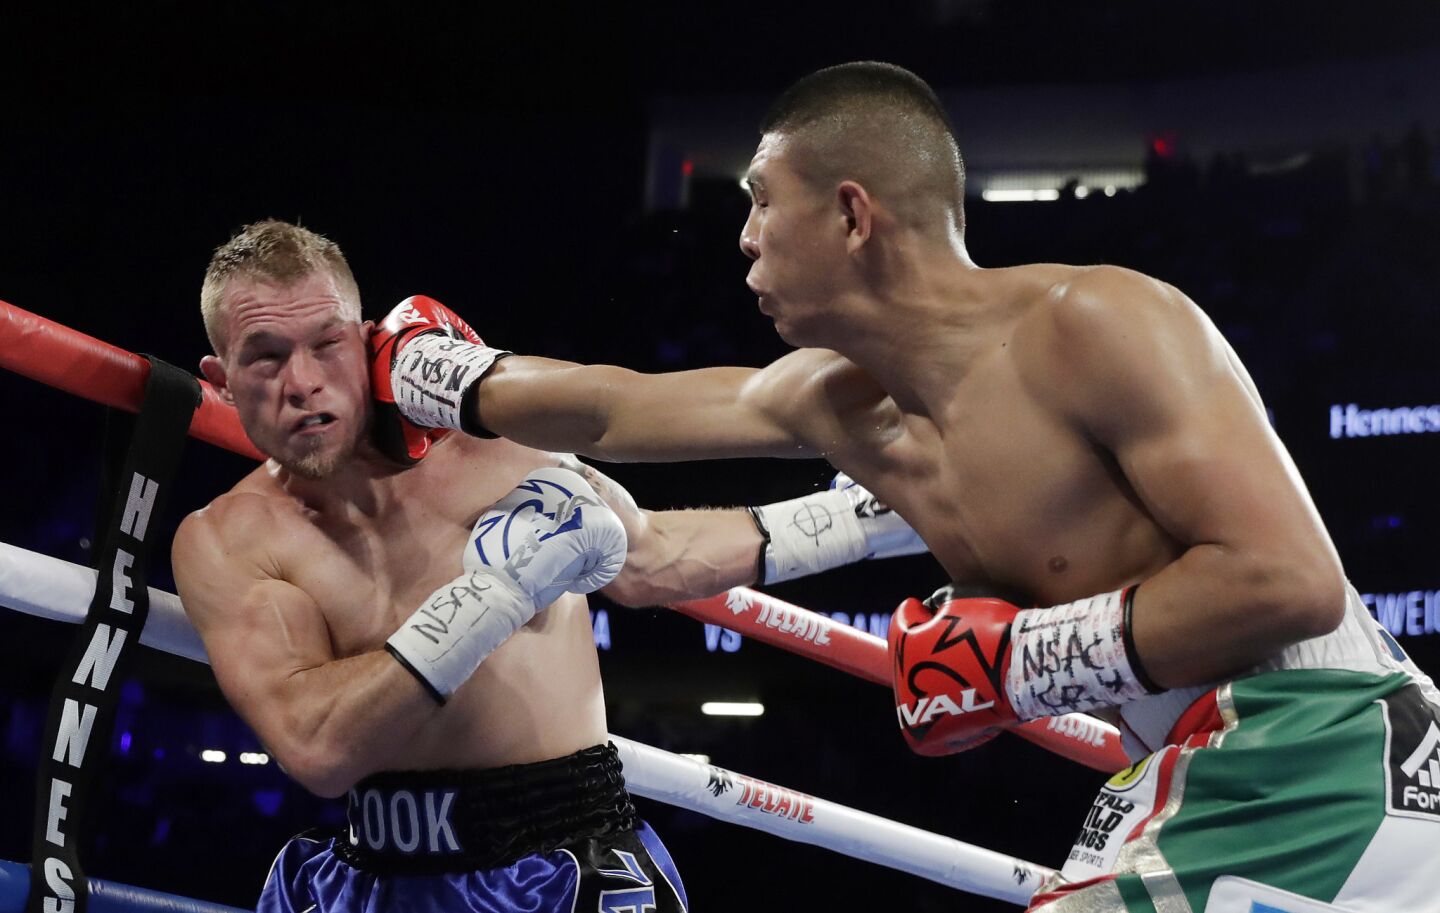 Jaime Munguia, right, punches Brandon Cook during their WBO junior middleweight championship boxing match, Saturday, Sept. 15, 2018, in Las Vegas. Munguia won by TKO.